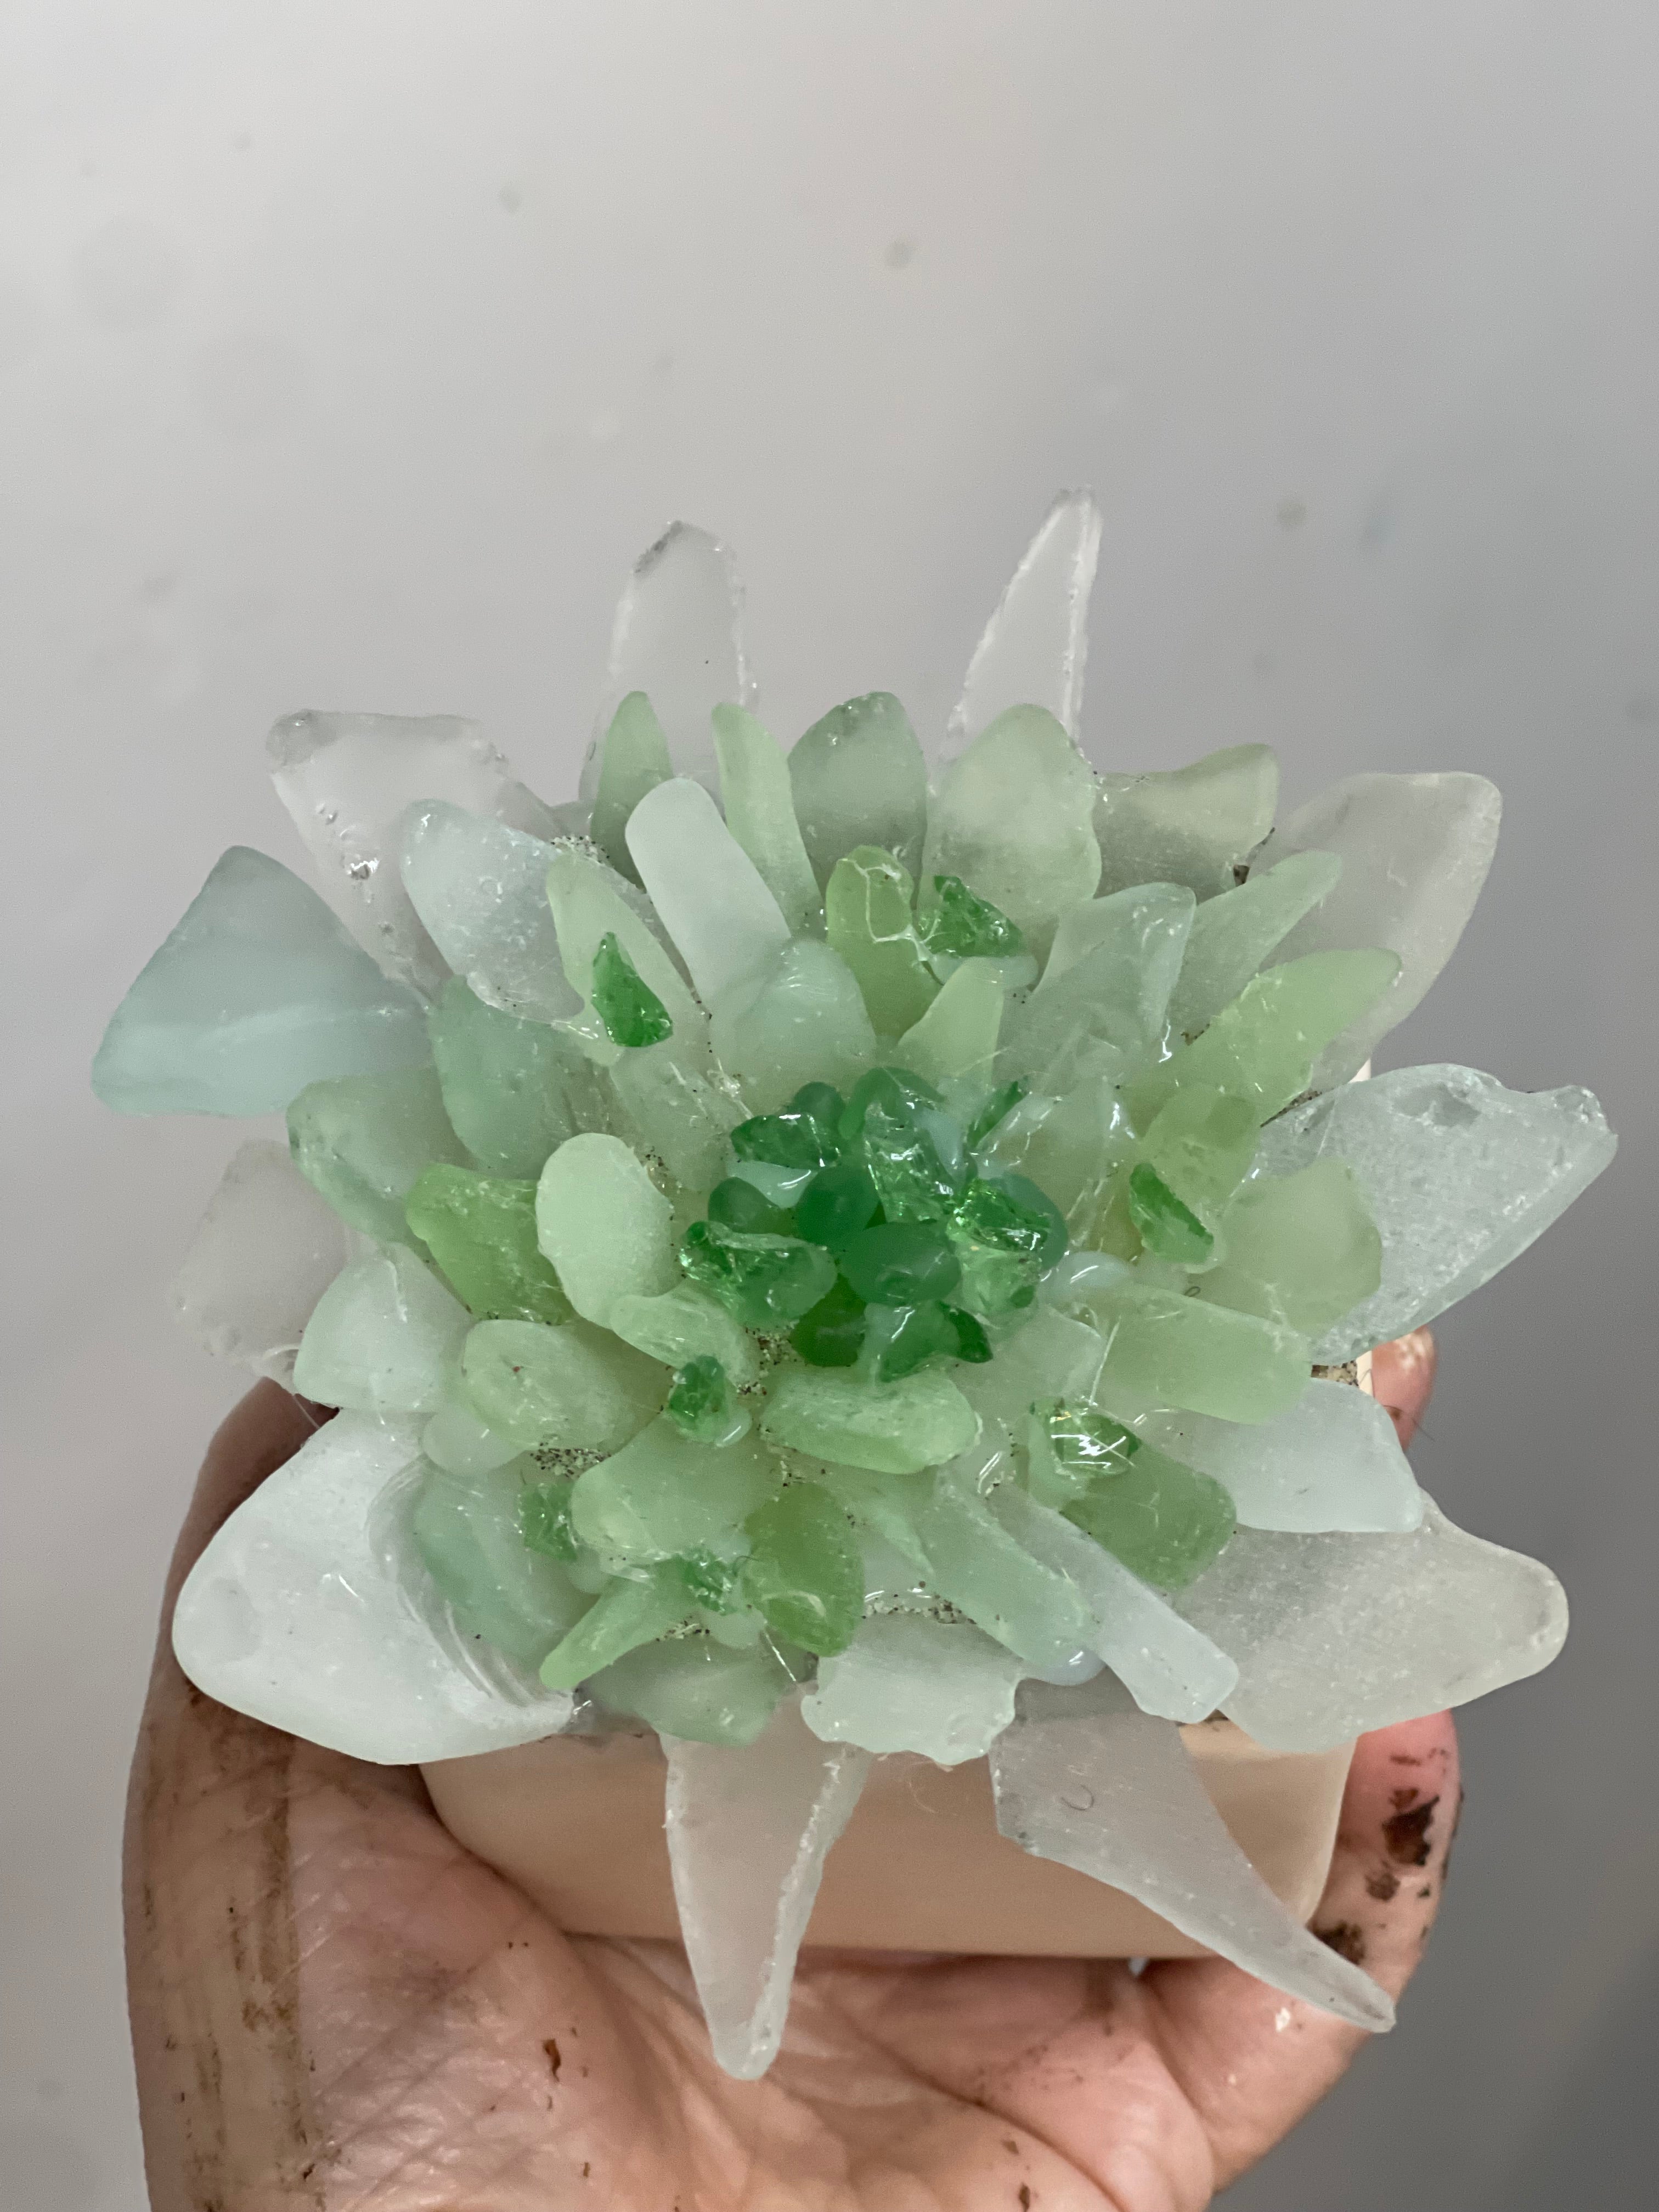 DIY Sea Glass Art | Join Open Workshop Or Private Event for a Sea Glass Session